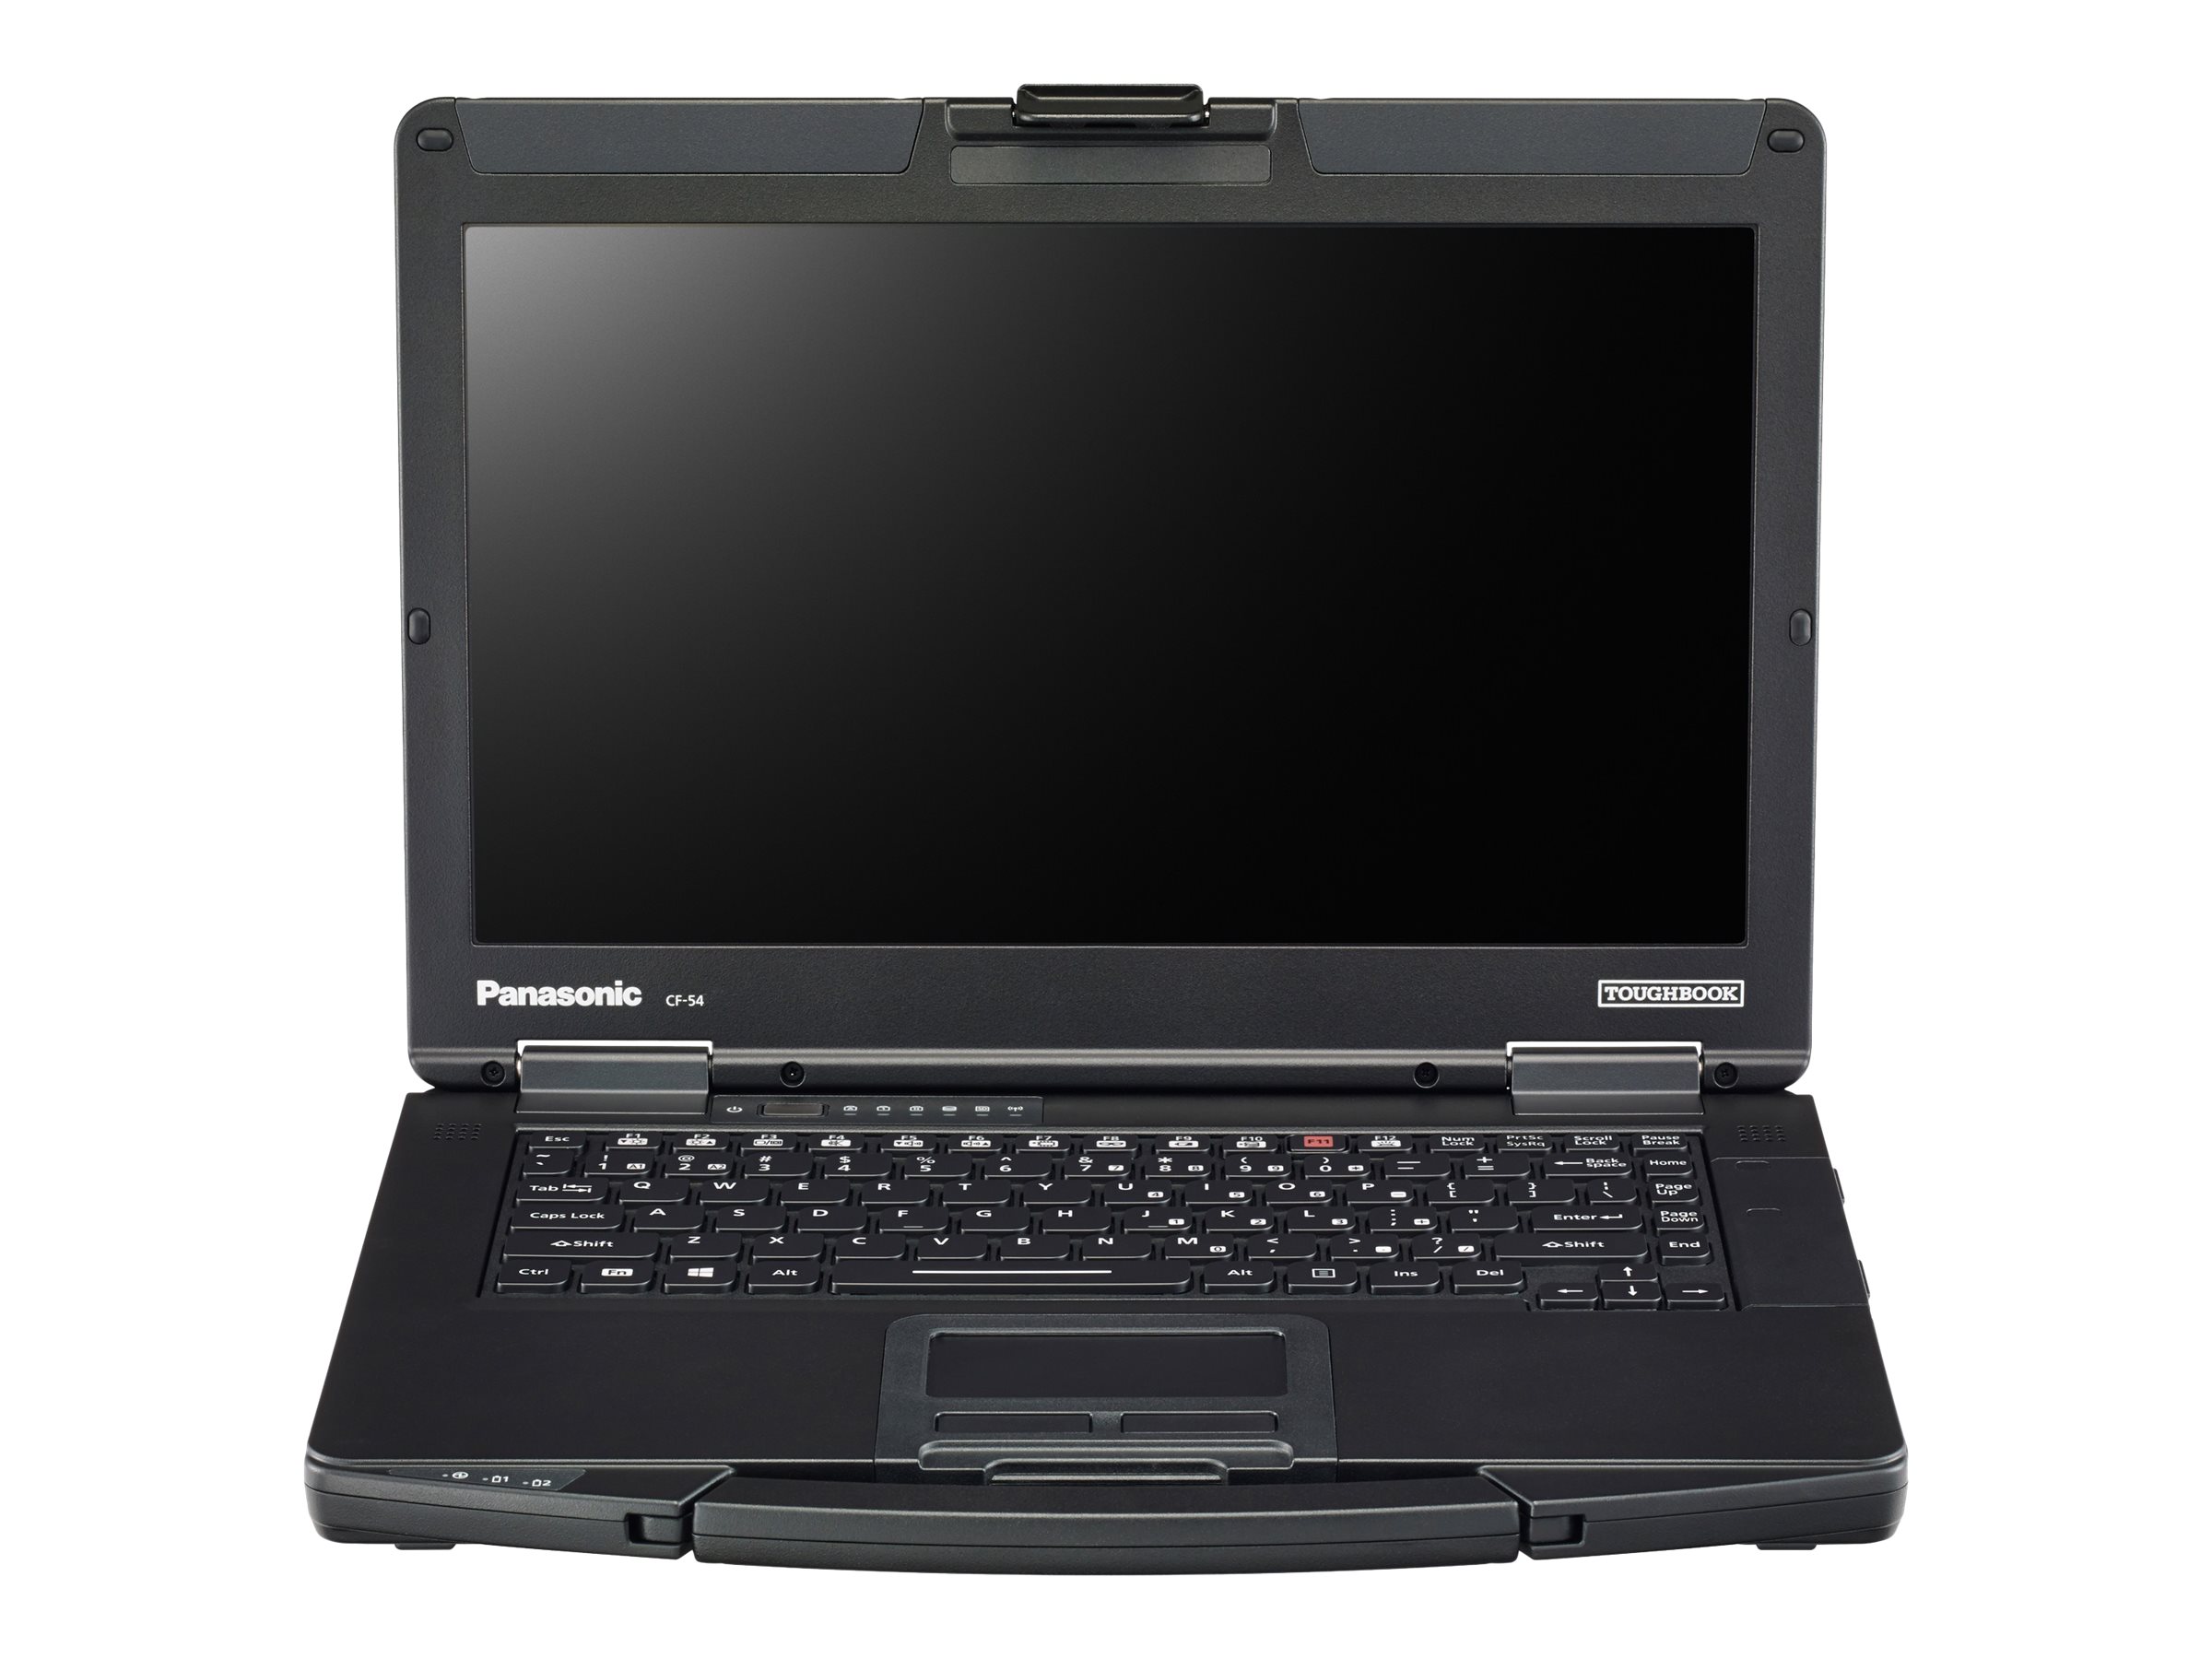 Panasonic Toughbook 54 Prime - Intel Core i7 - 7600U / up to 3.9 GHz - vPro - Win 10 Pro - HD Graphics 620 - 8 GB RAM - 256 GB SSD - 14" 1366 x 768 (HD) - Wi-Fi 5 - with Toughbook Preferred - image 3 of 16